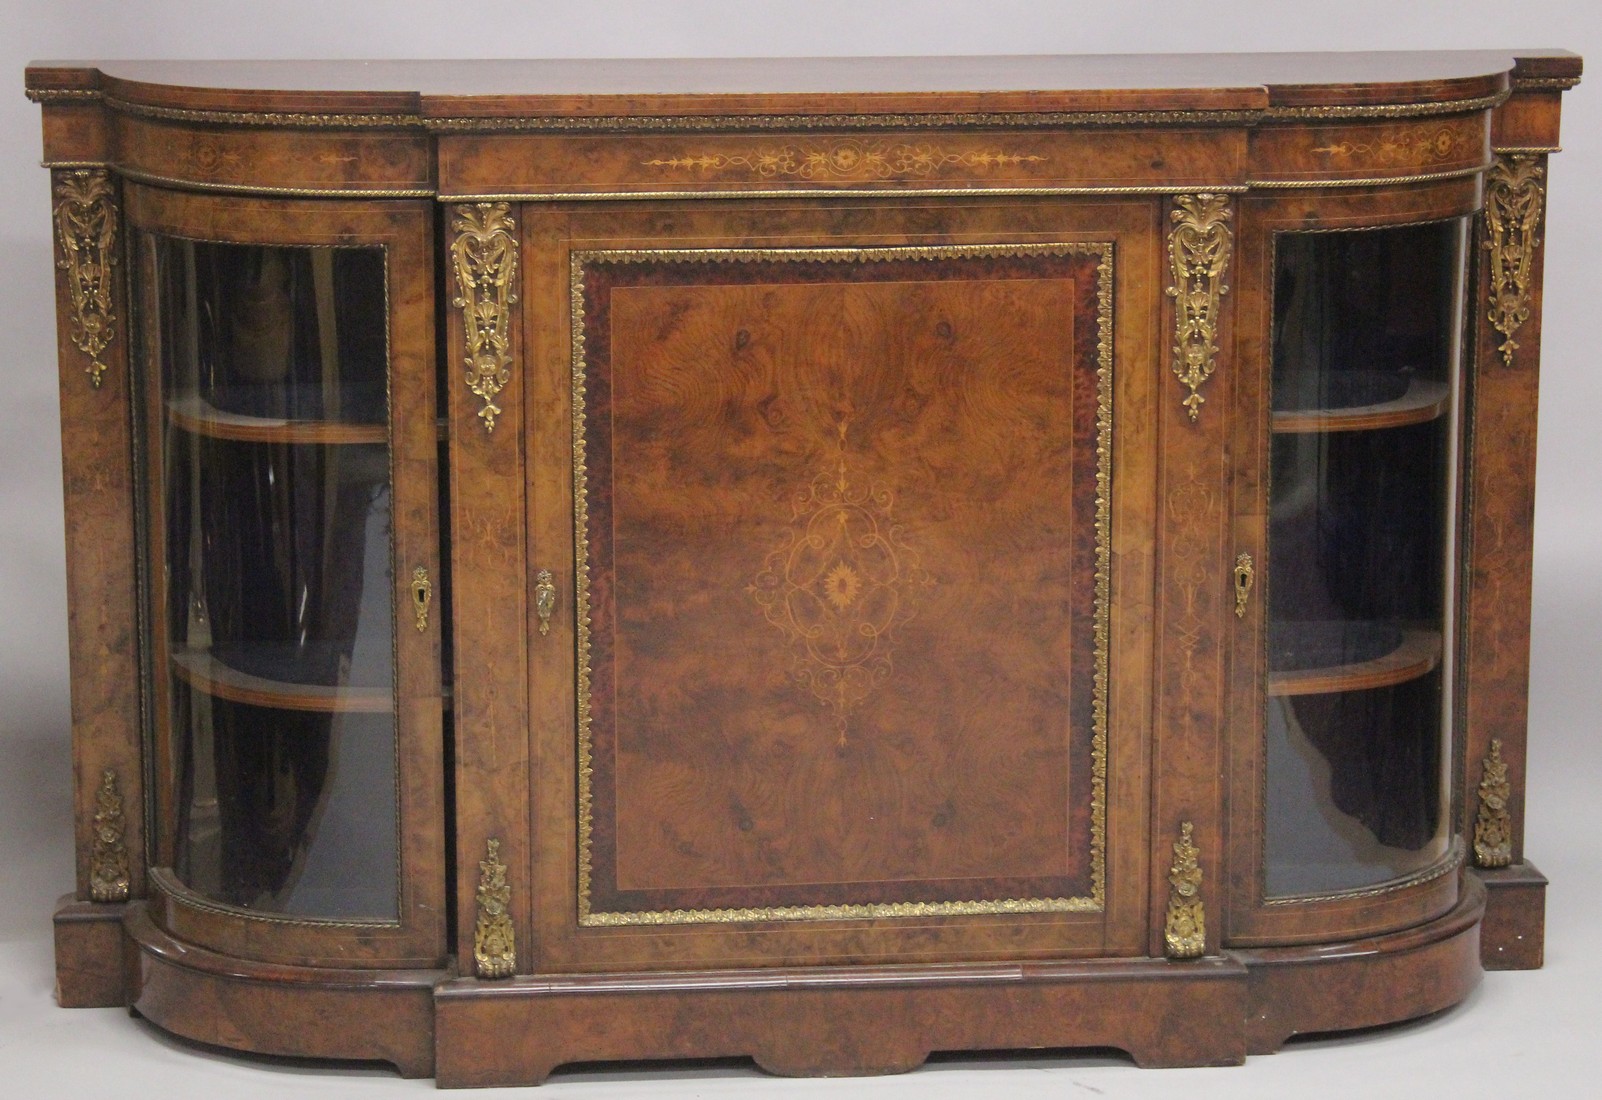 A GOOD VICTORIAN WALNUT AND MARQUETRY CREDENZA by EDWARD & ROBERTS with figured walnut top, ormolu